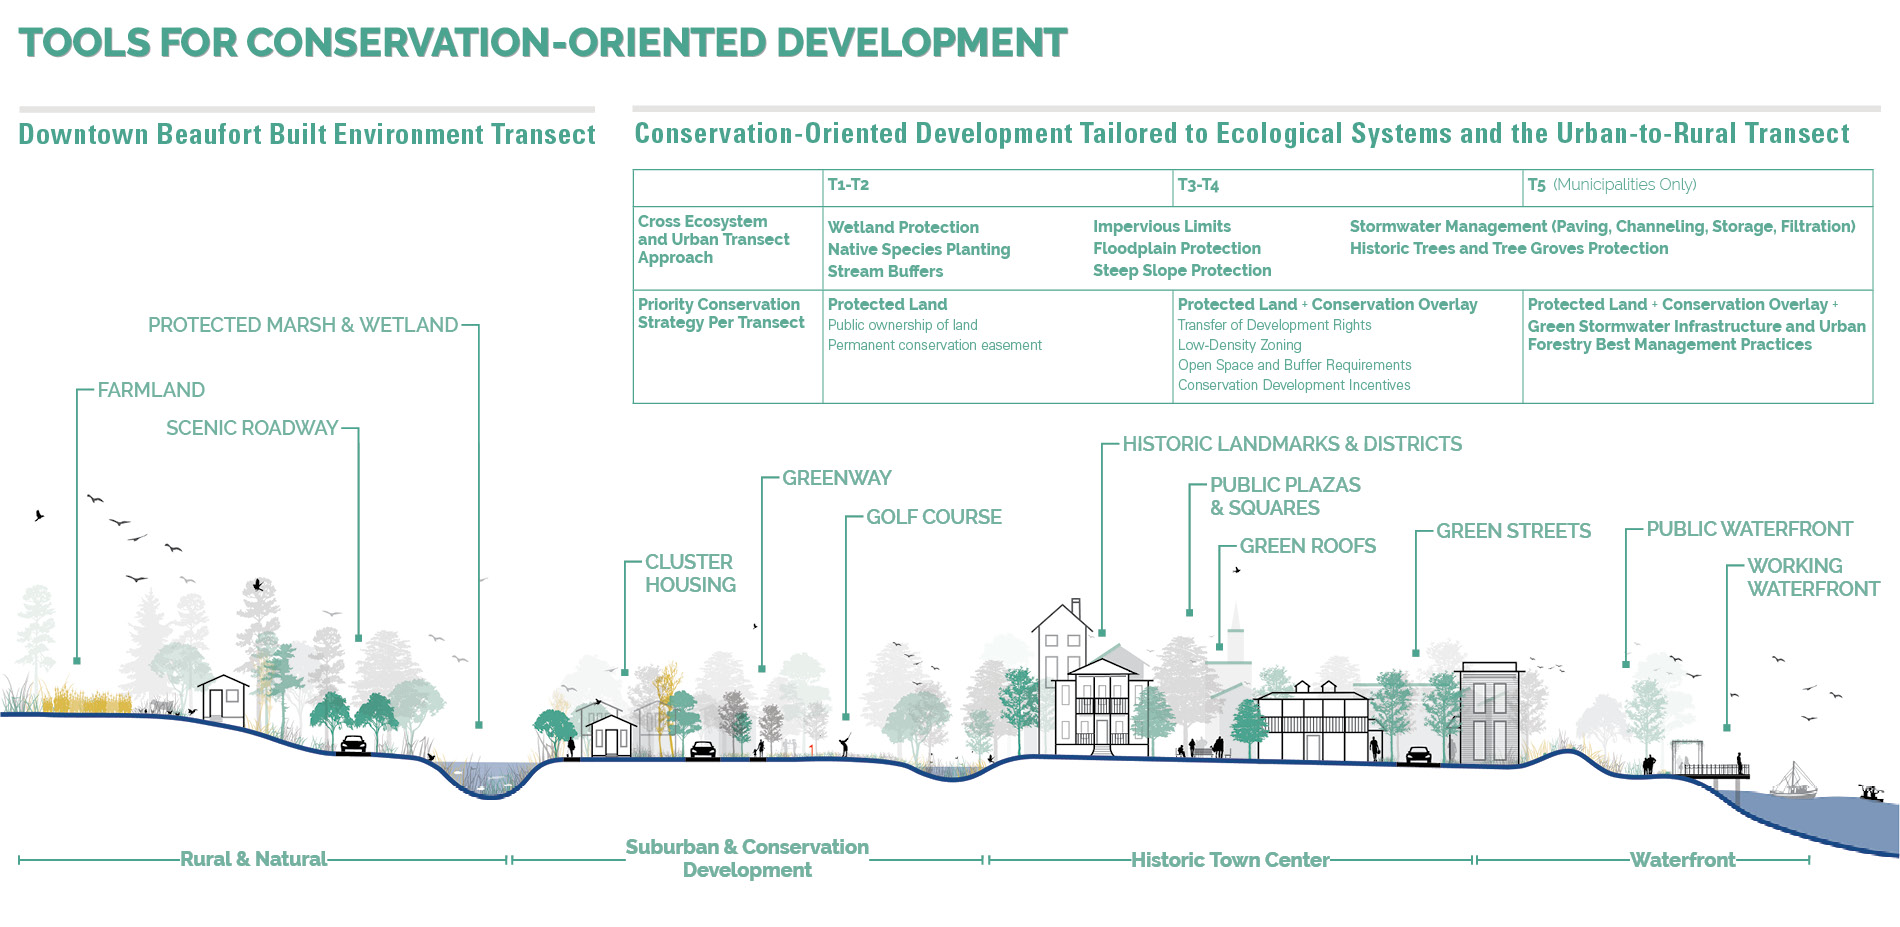 Tools for Conservation-Oriented Development